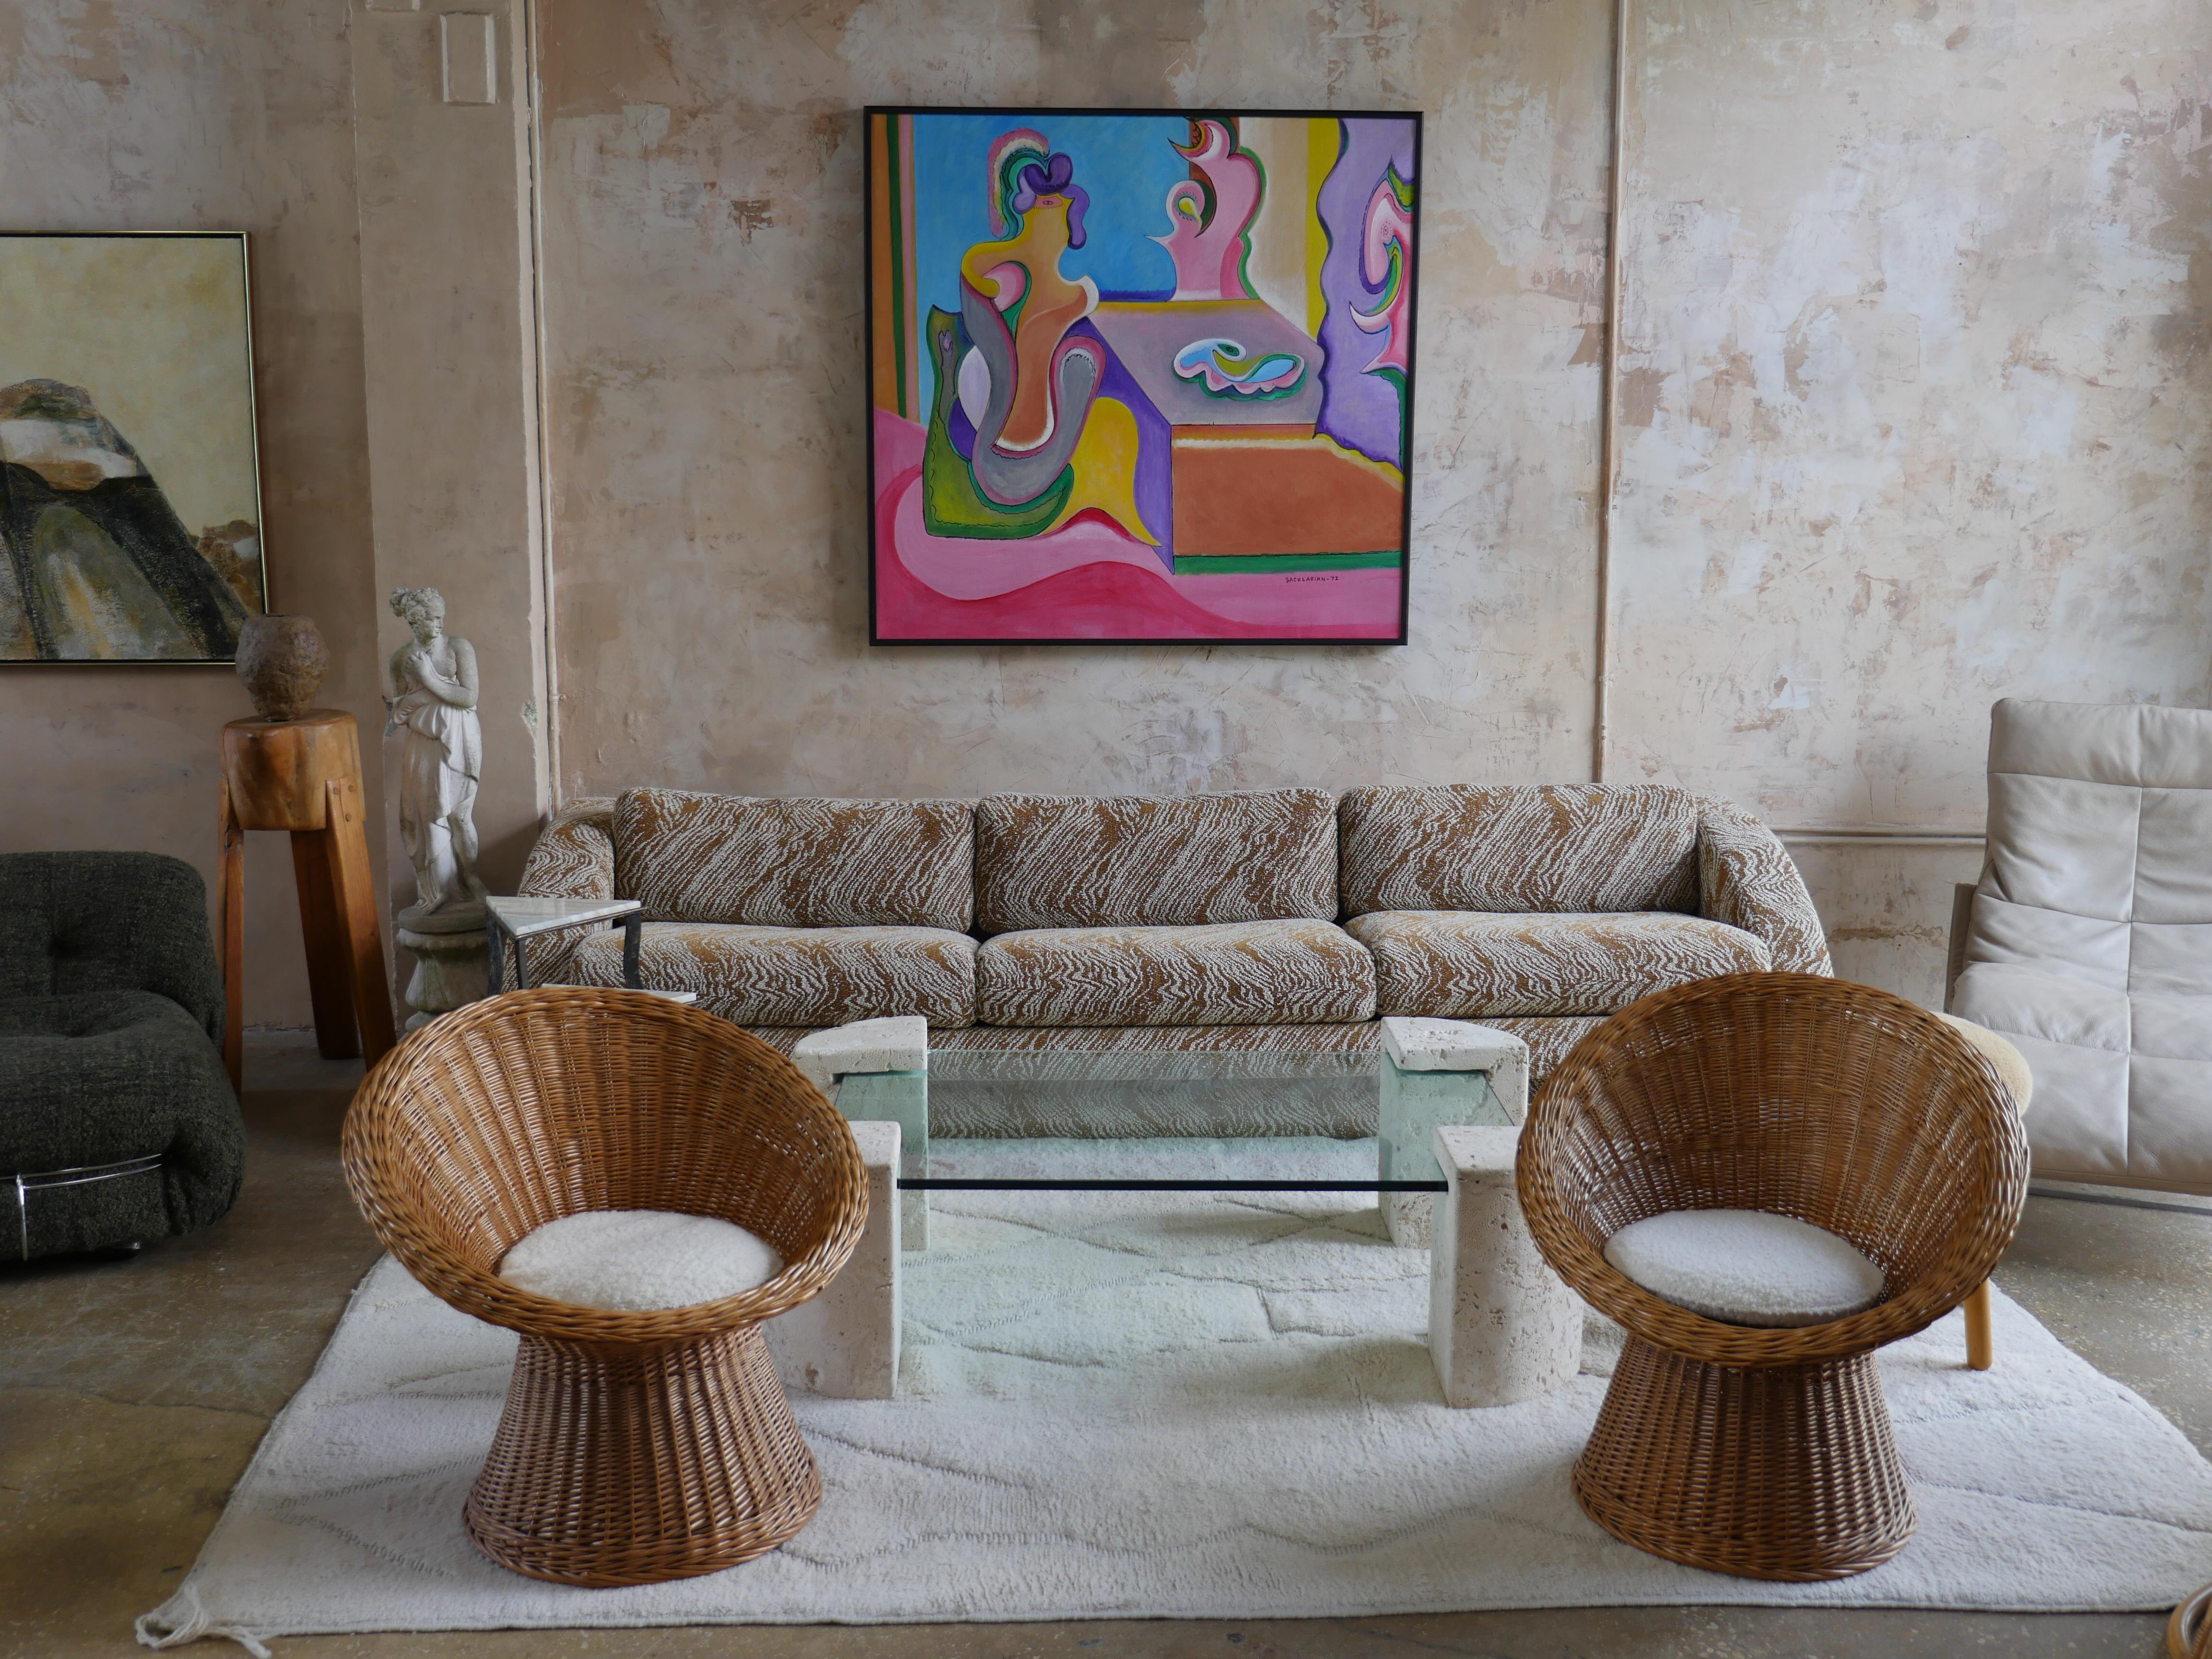 Beautiful pair of Mid-Century rattan, wicker weave lounge chairs with new boucle, off-white colored upholstery from french textile company Les Creations de la Maison. These chairs are elegant statement pieces that add a nice touch of warmth to any